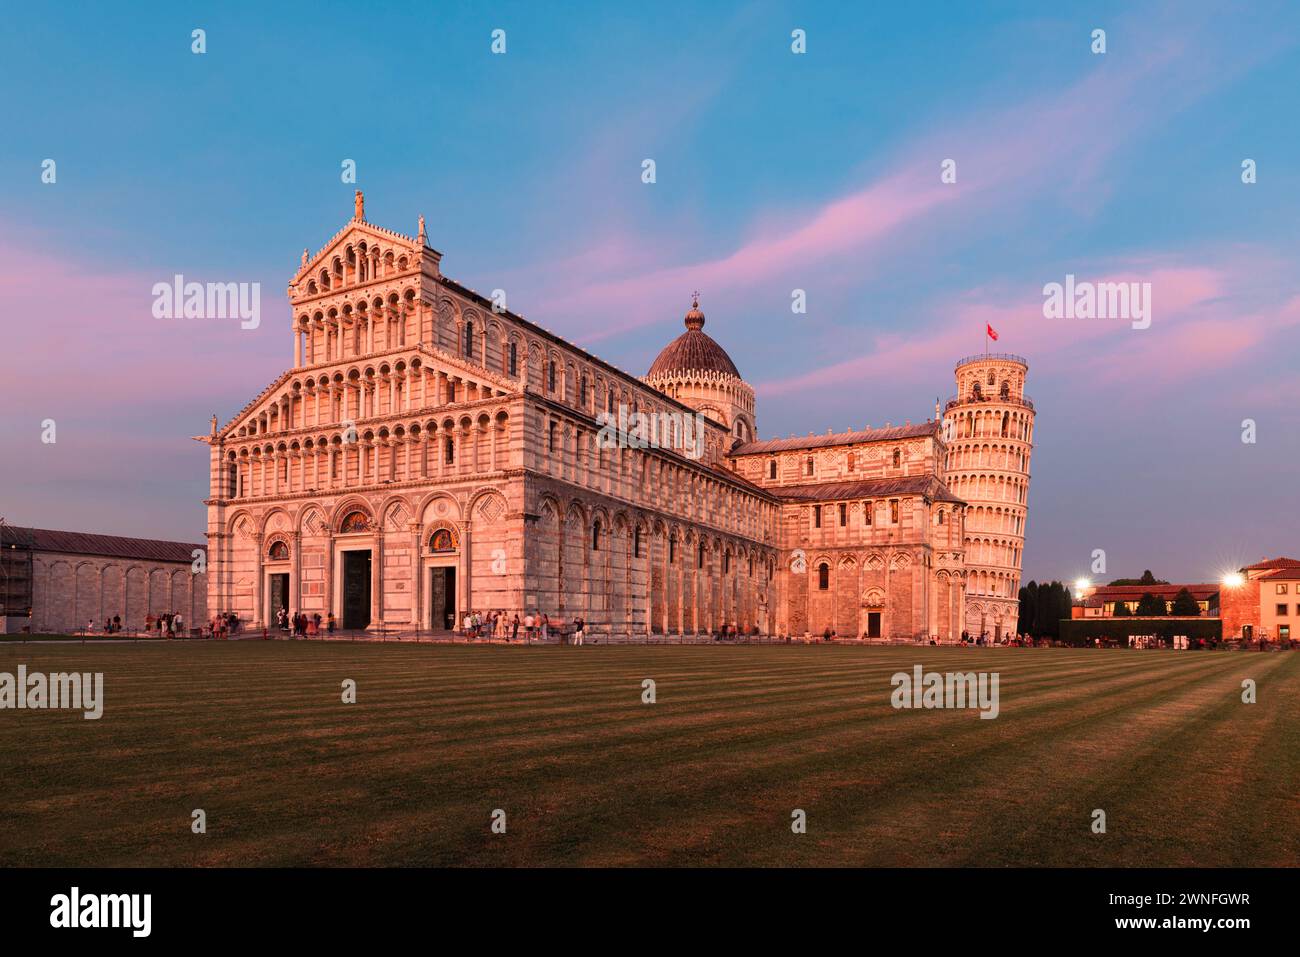 The Cathedral and the Leaning Tower of Pisa glow in the pink light of dusk, Pisa, Tuscany, Italy Stock Photo